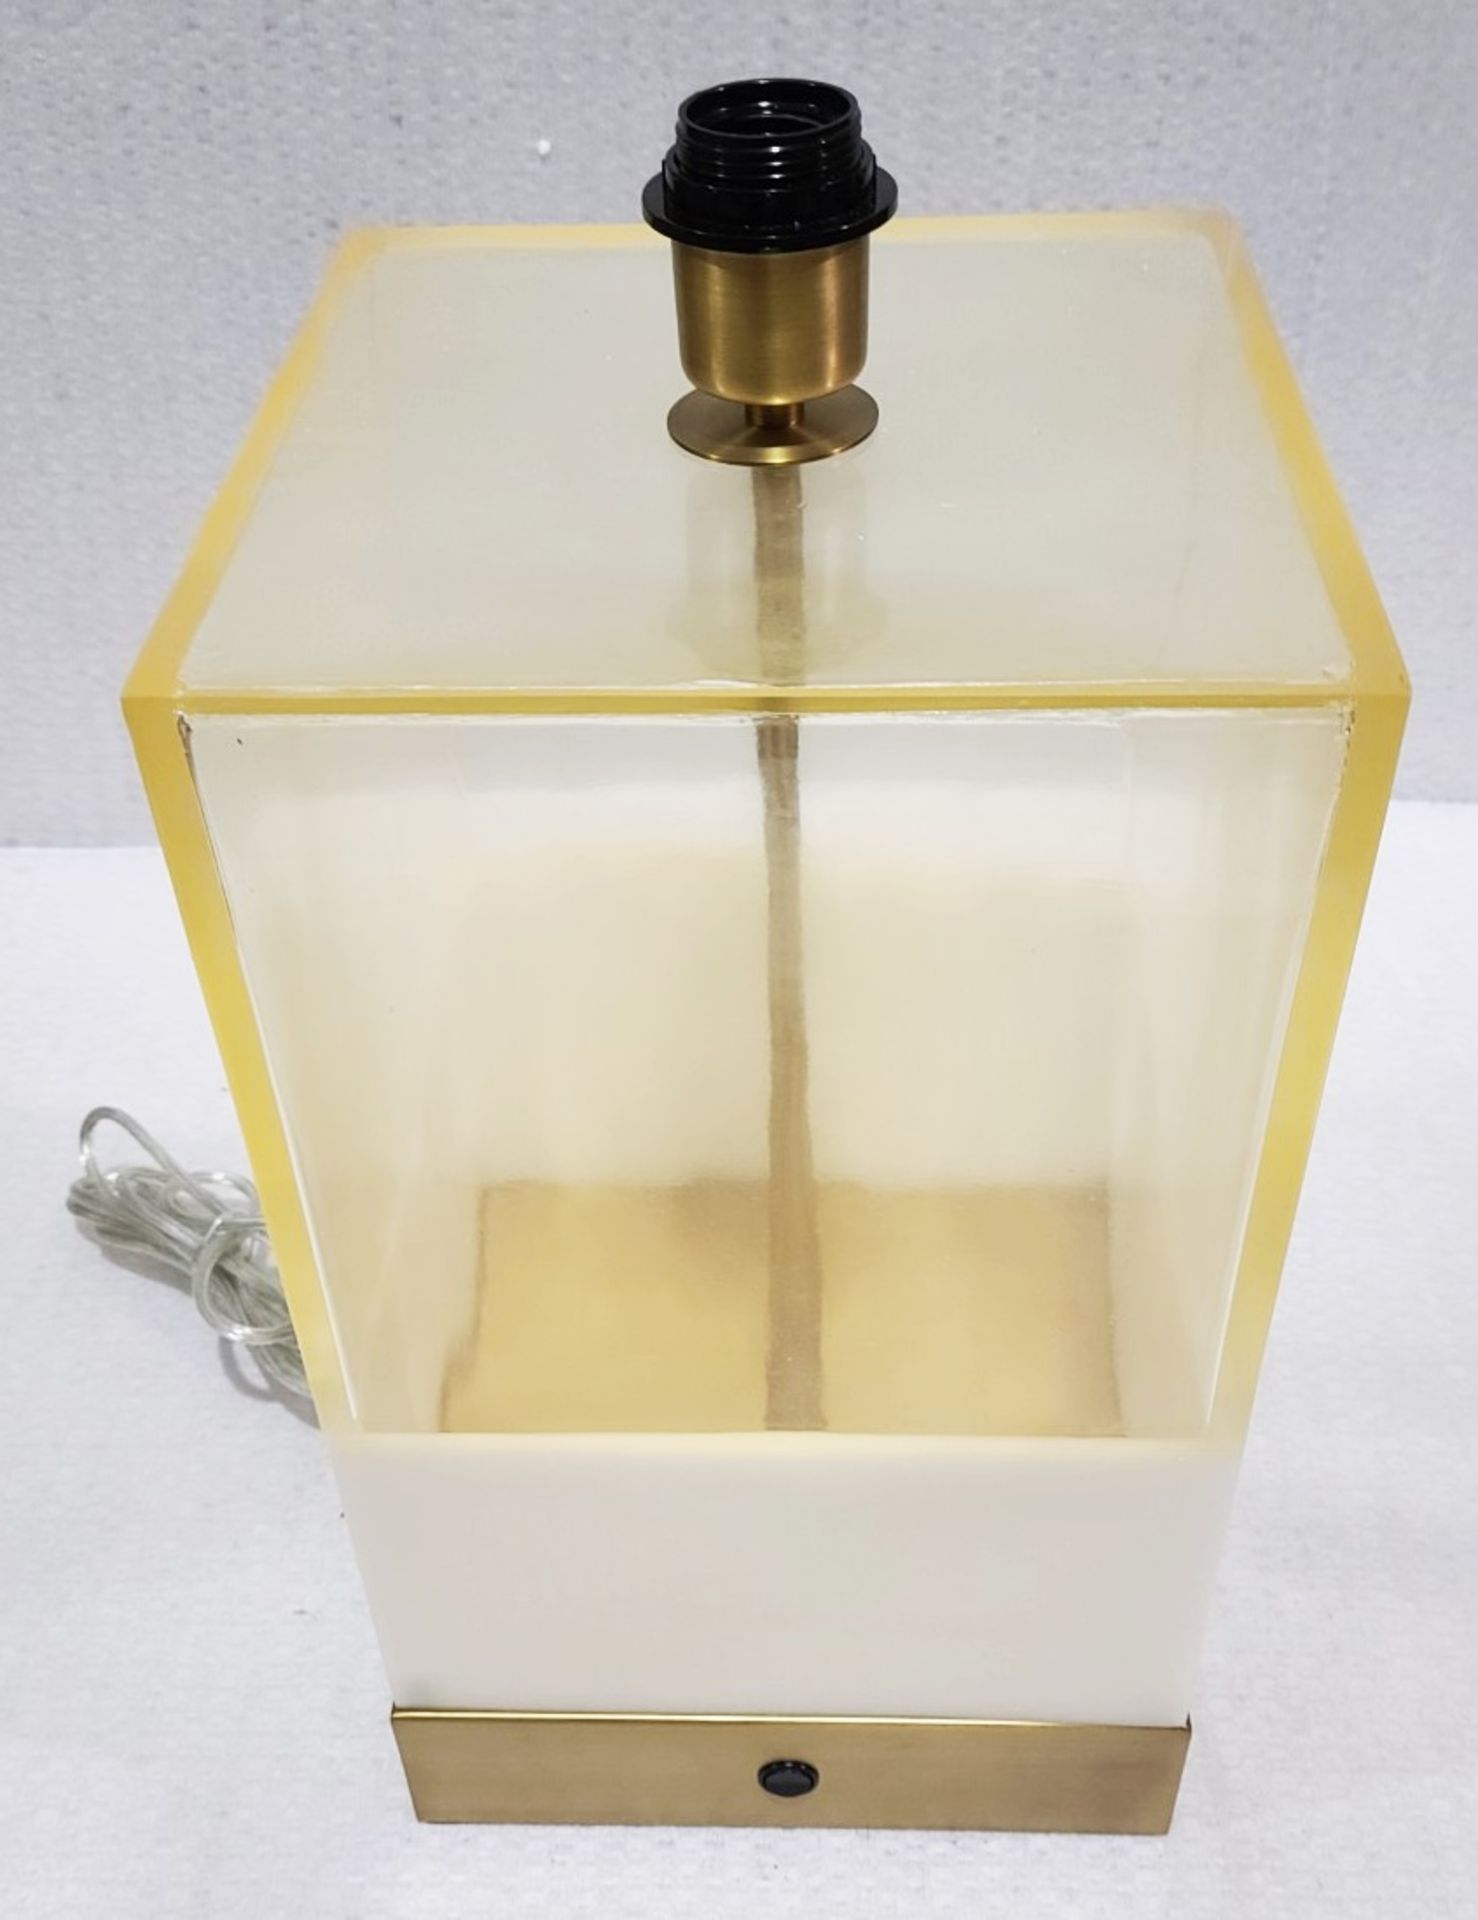 1 x CHELSOM Rectangular Gold Tinted Glass Box Table Lamp With Stone Lower Third And Brass Base - Image 3 of 10